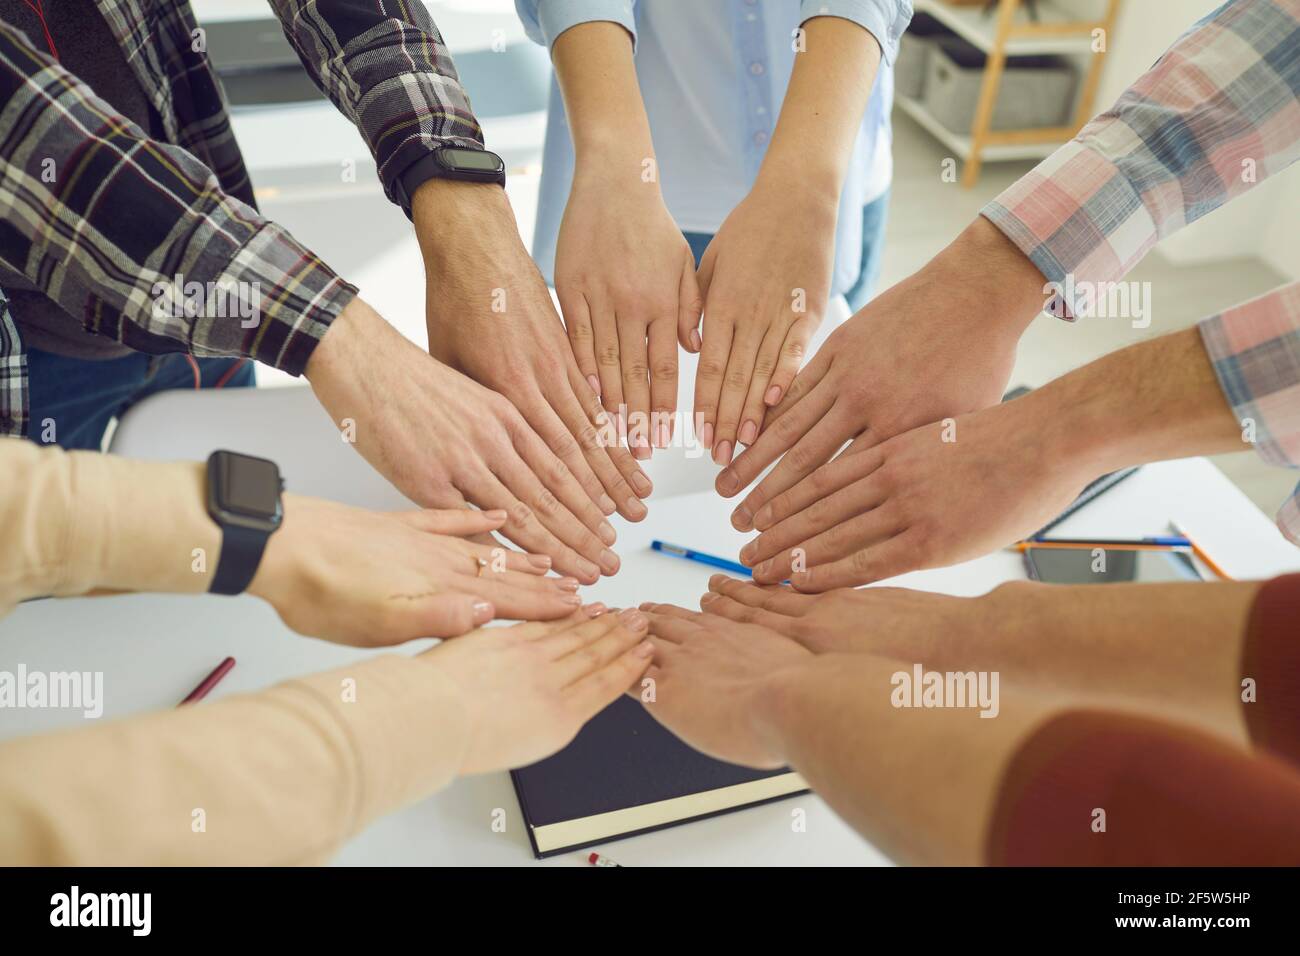 Group of school or college students join hands showing their unity and determination Stock Photo